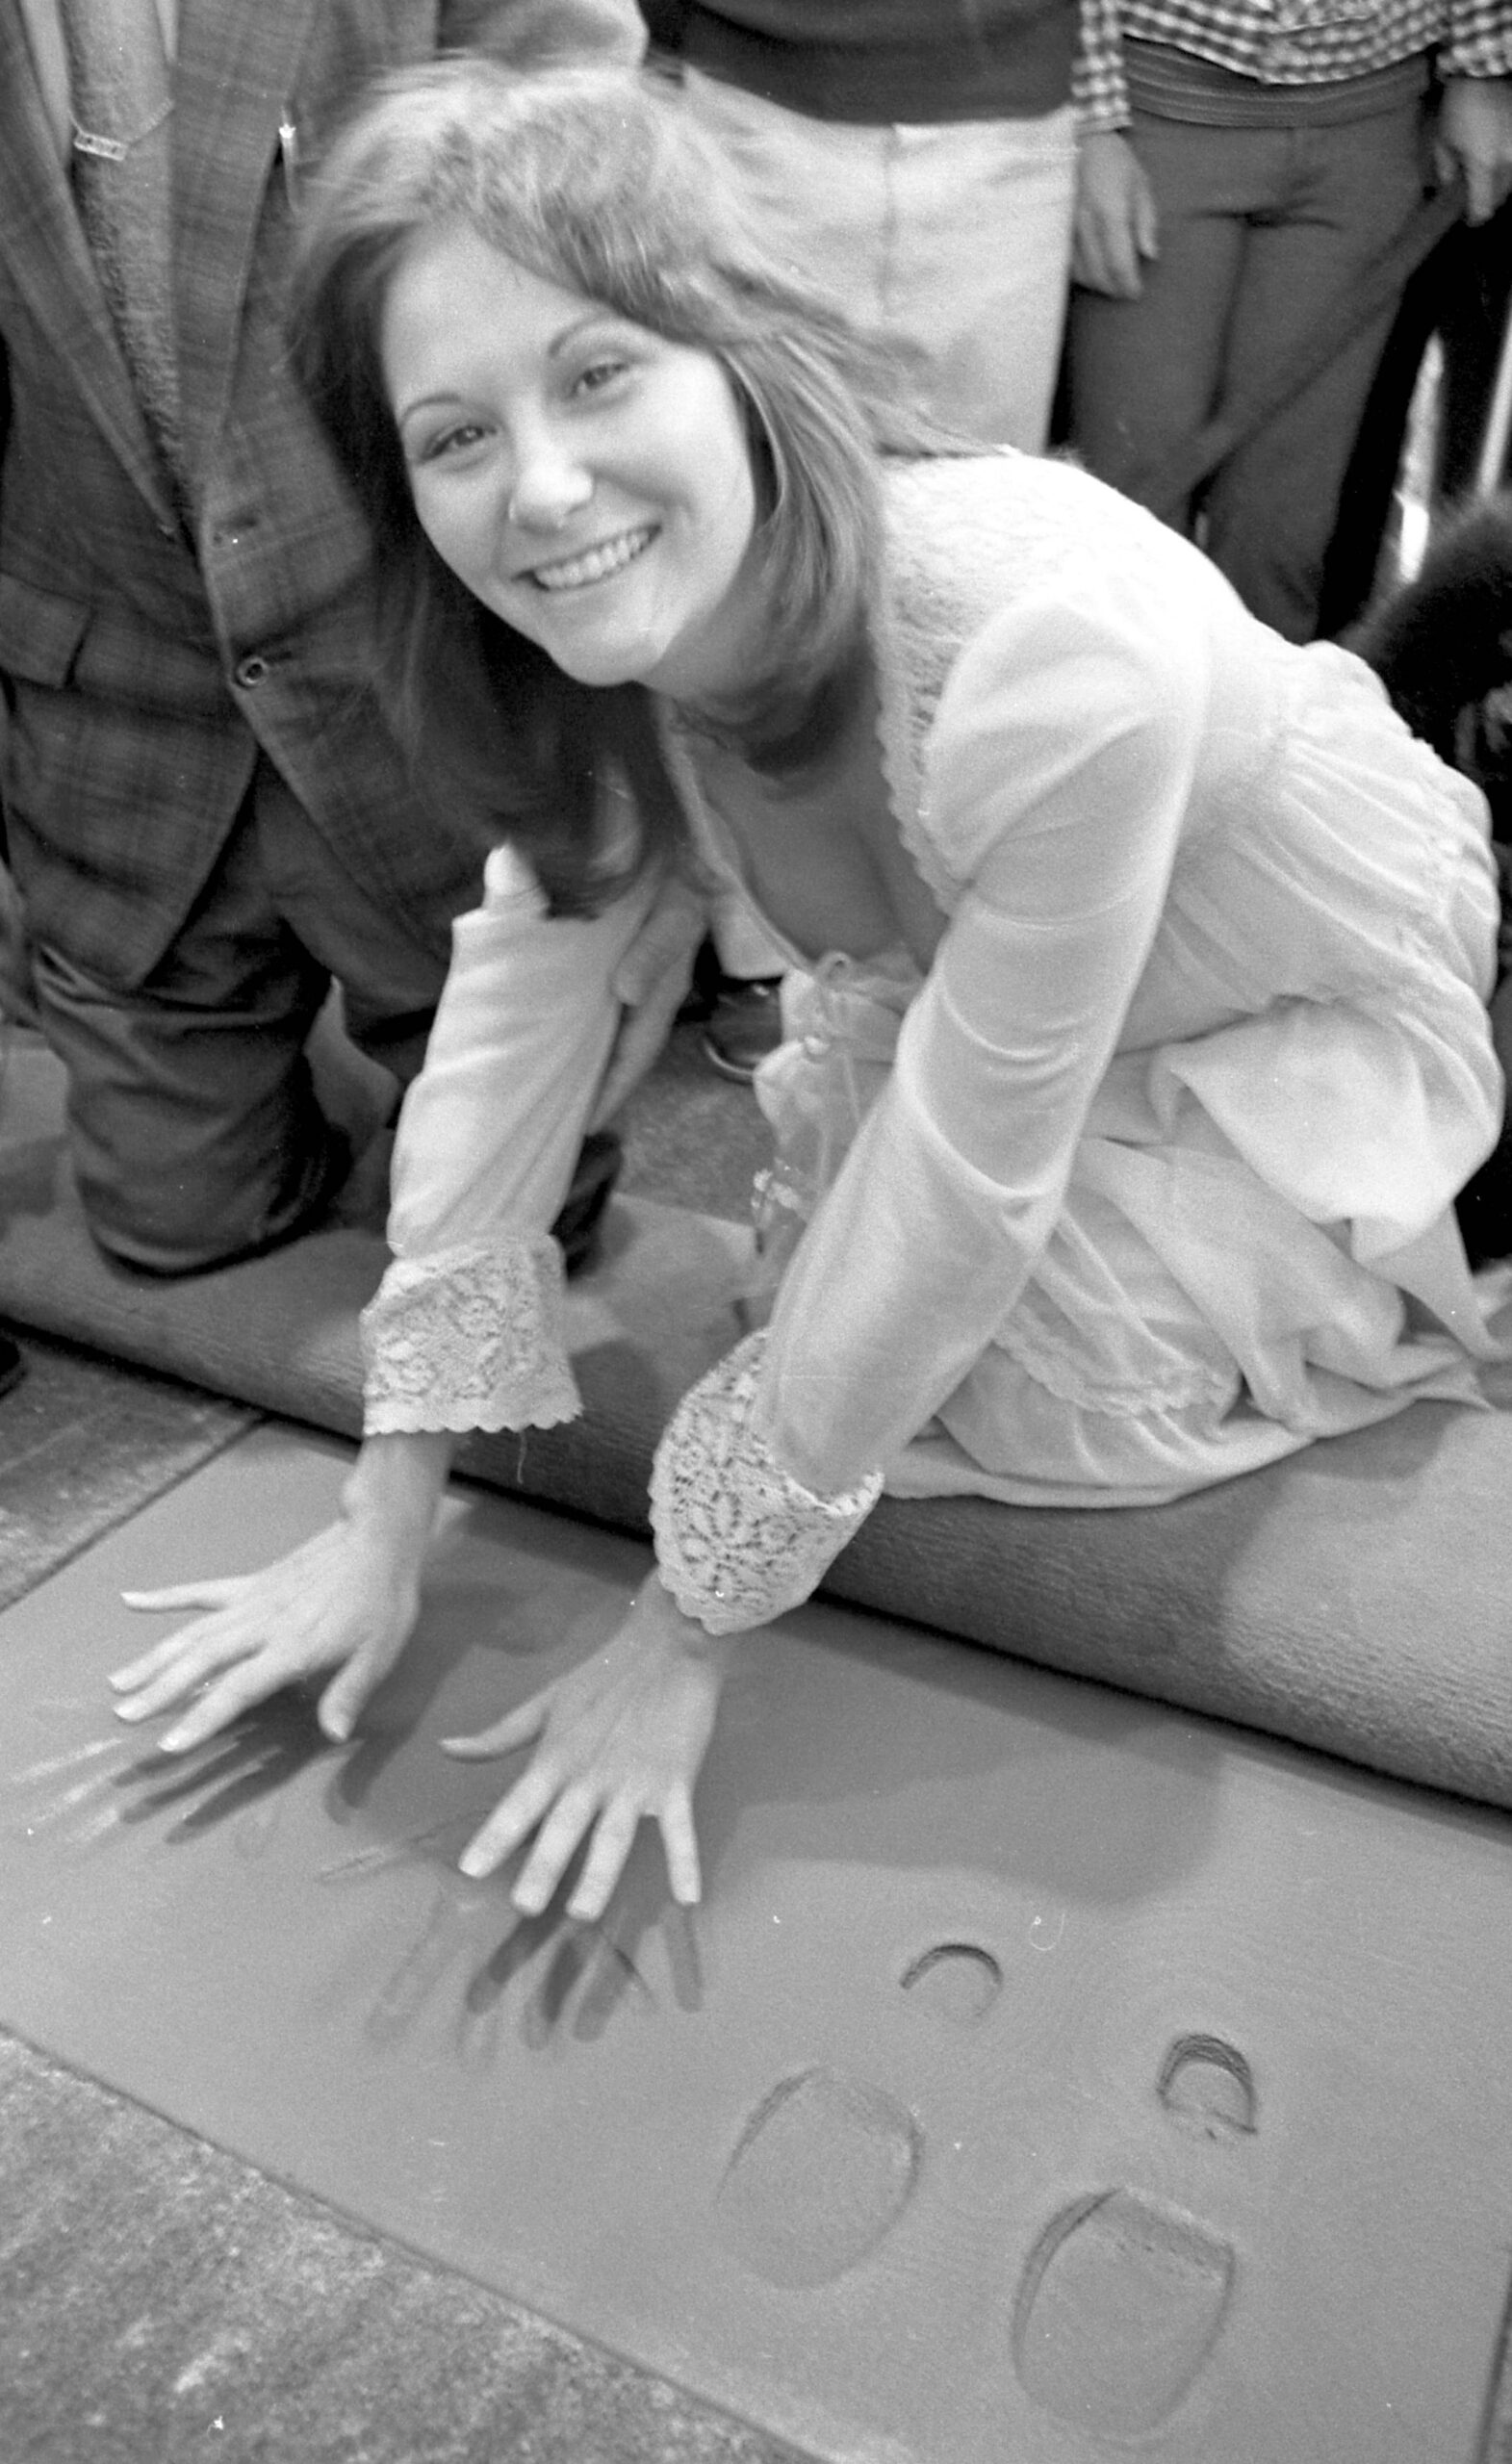 Linda Lovelace leaving hand imprints in front of the Pussycat Theater in Los Angeles, California on December 28, 1973